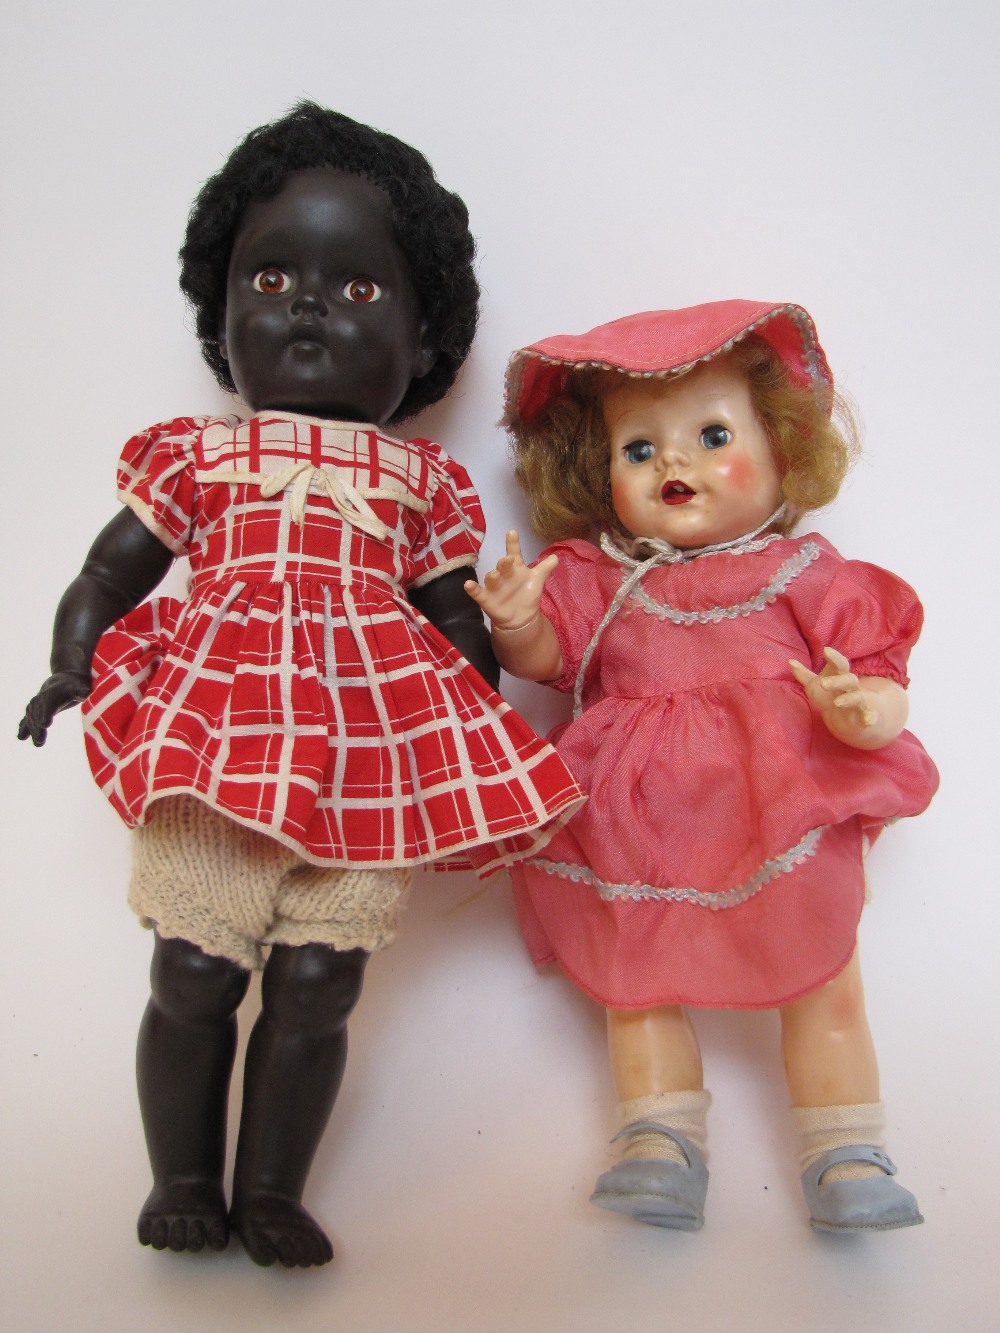 A Pedigree black rubber doll with go-to-sleep eyes and original clothes, together with another